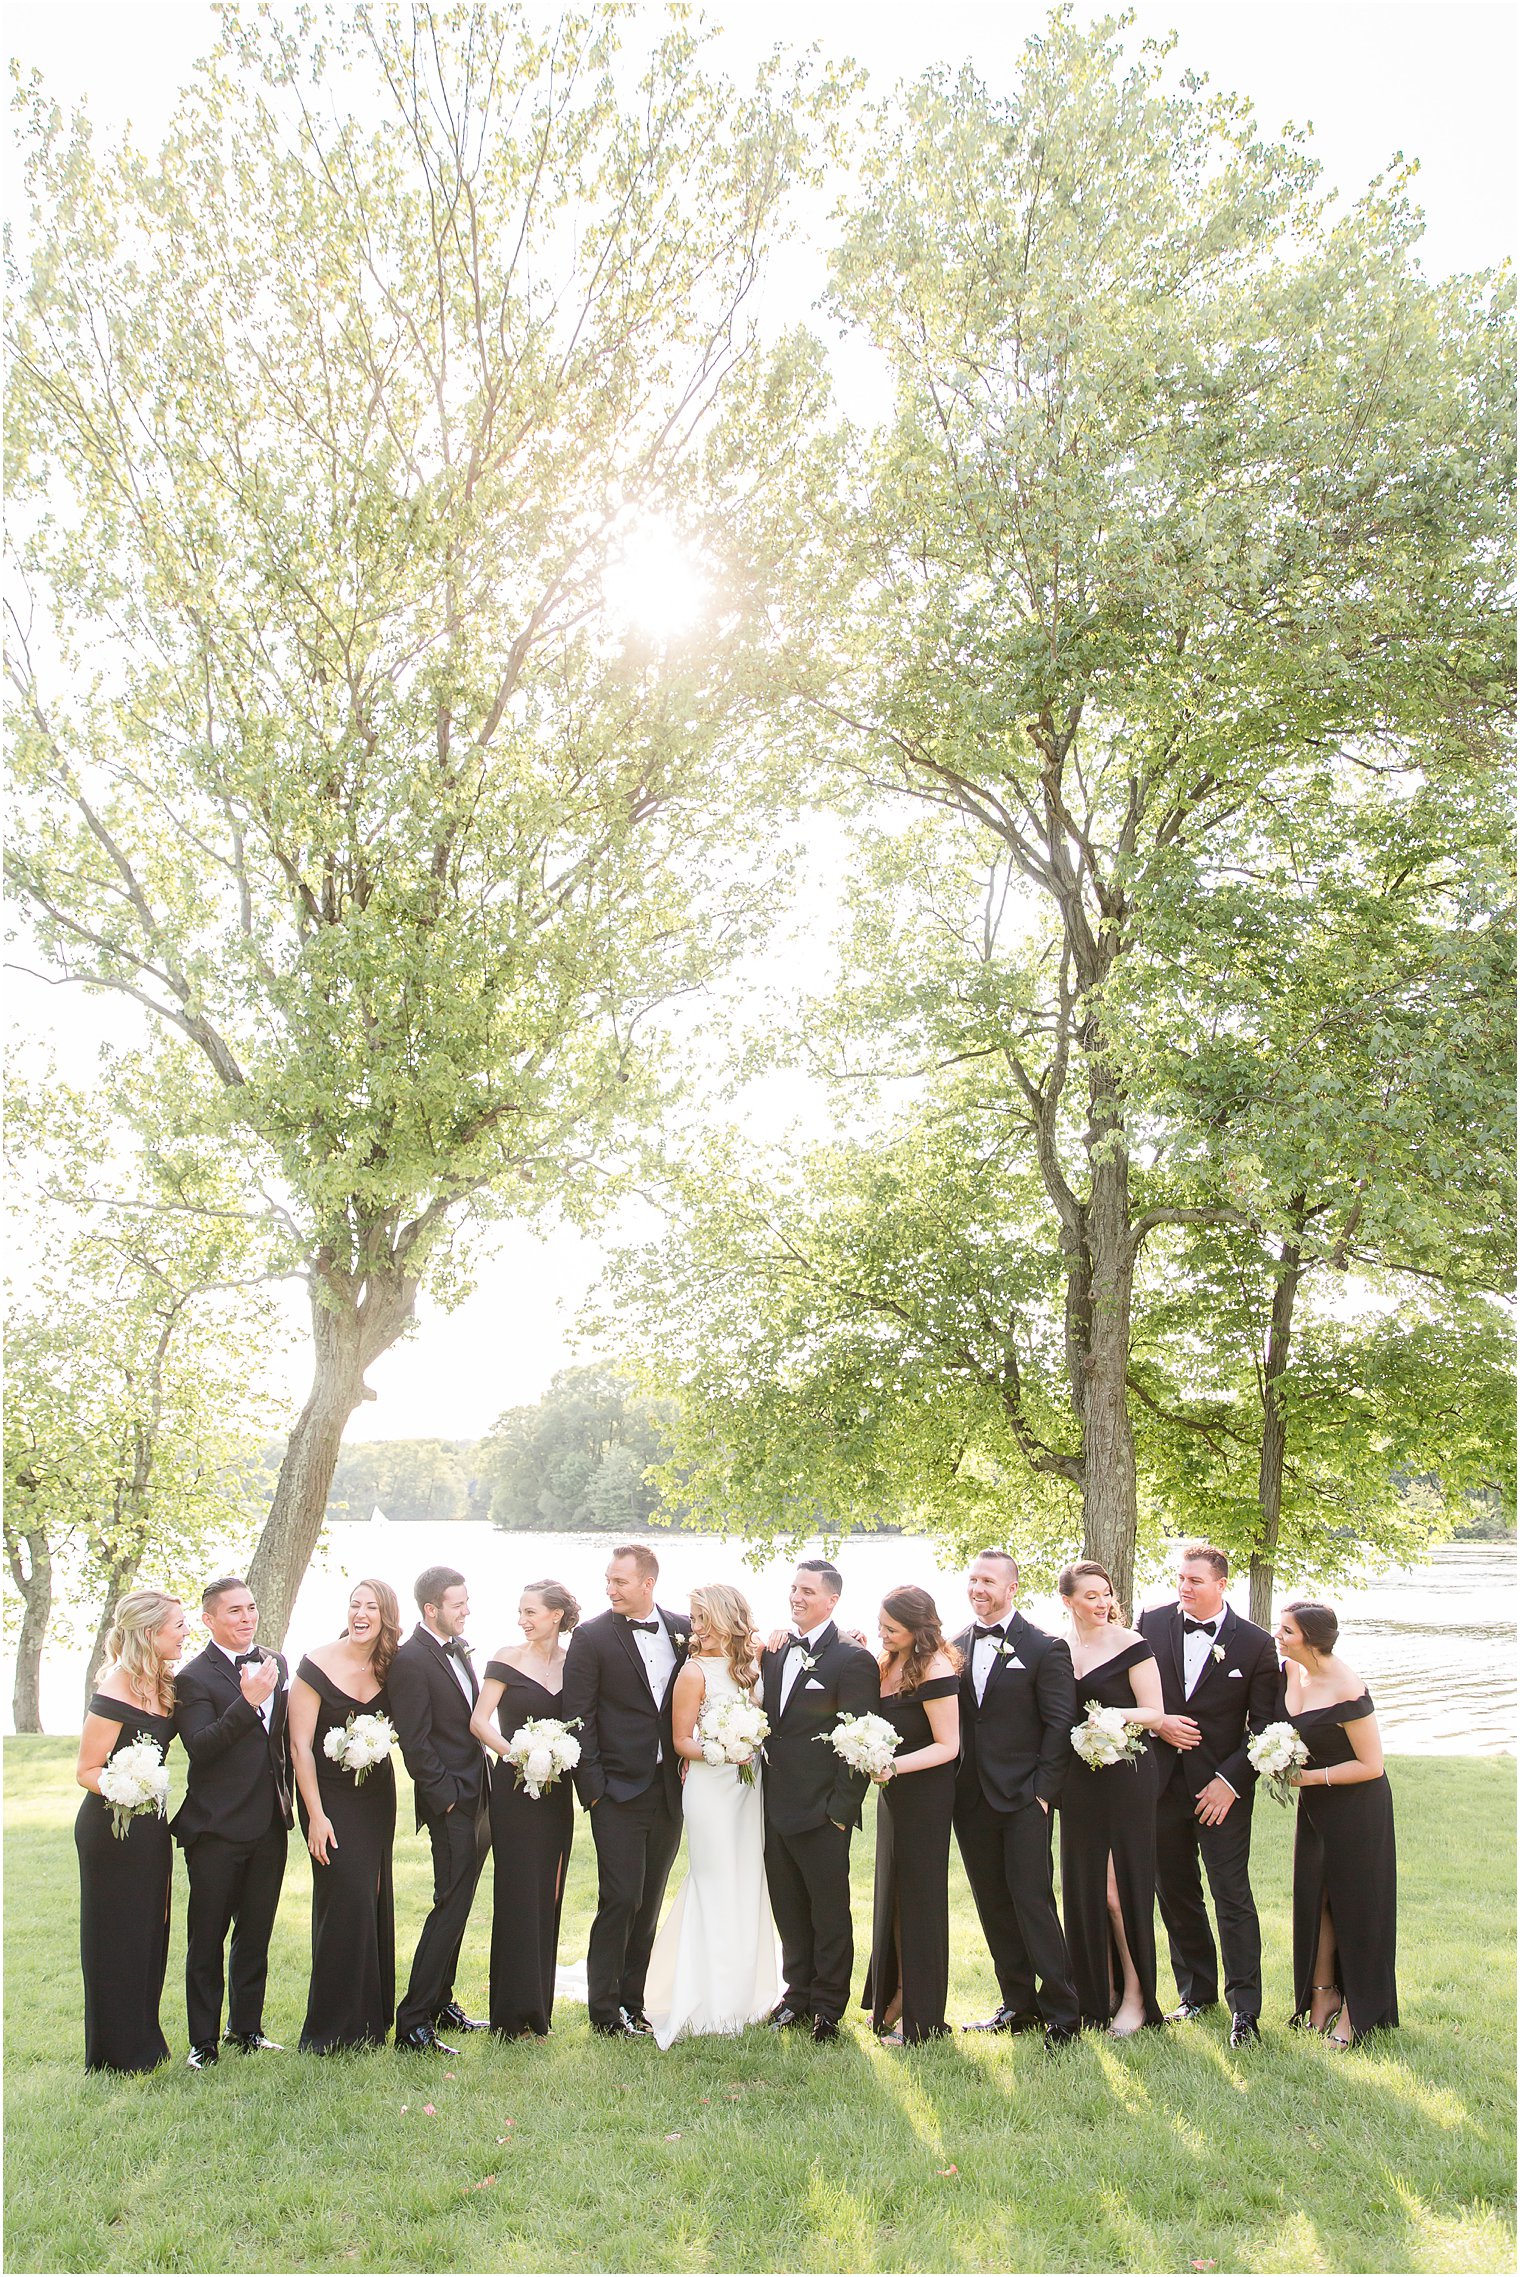 Wedding party wearing black dresses and black tuxedos